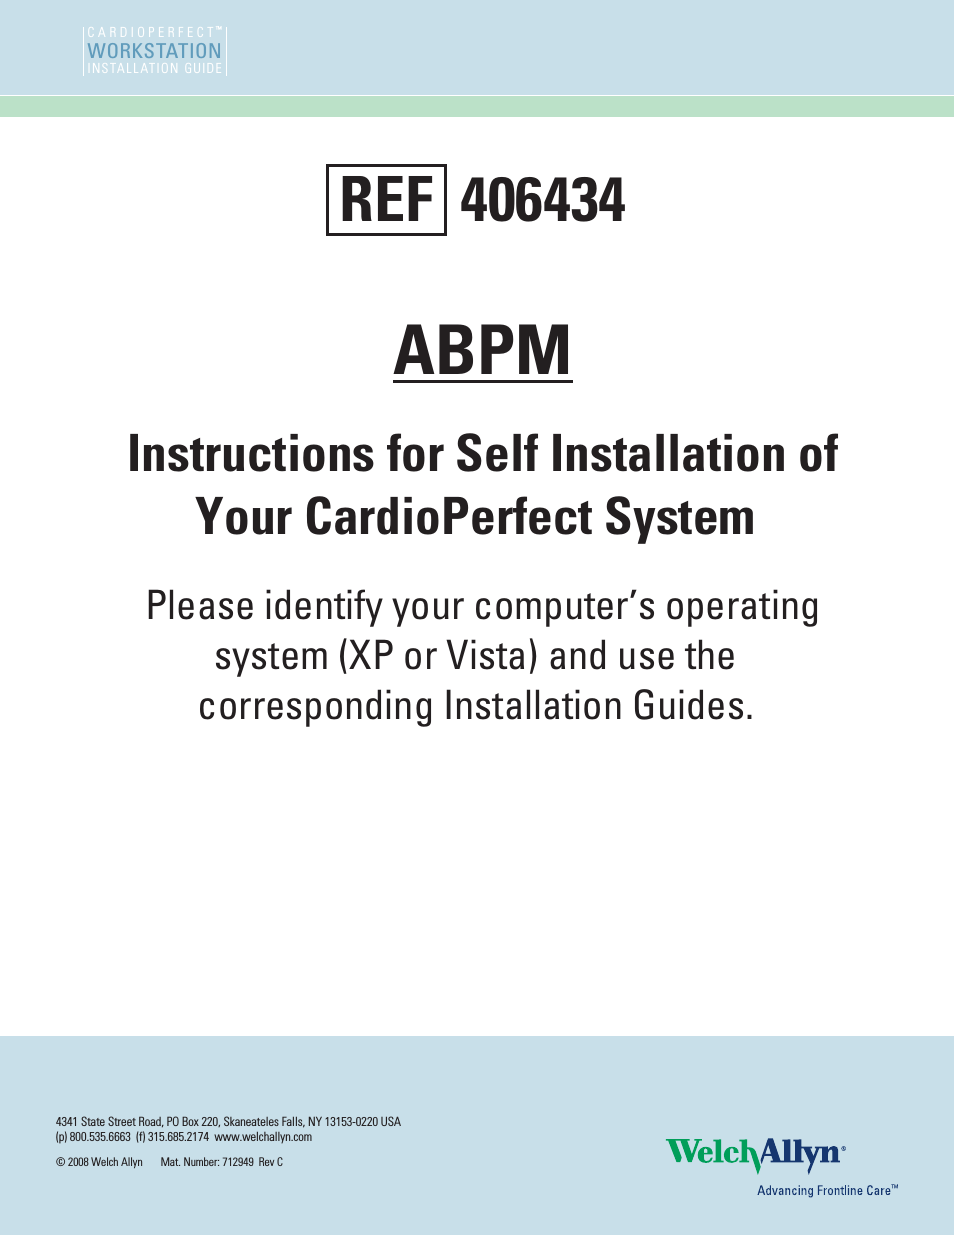 Cardio Perfect Workstation (SW 1.6.2) ABlood Pressue (BP)M - Installation Guide